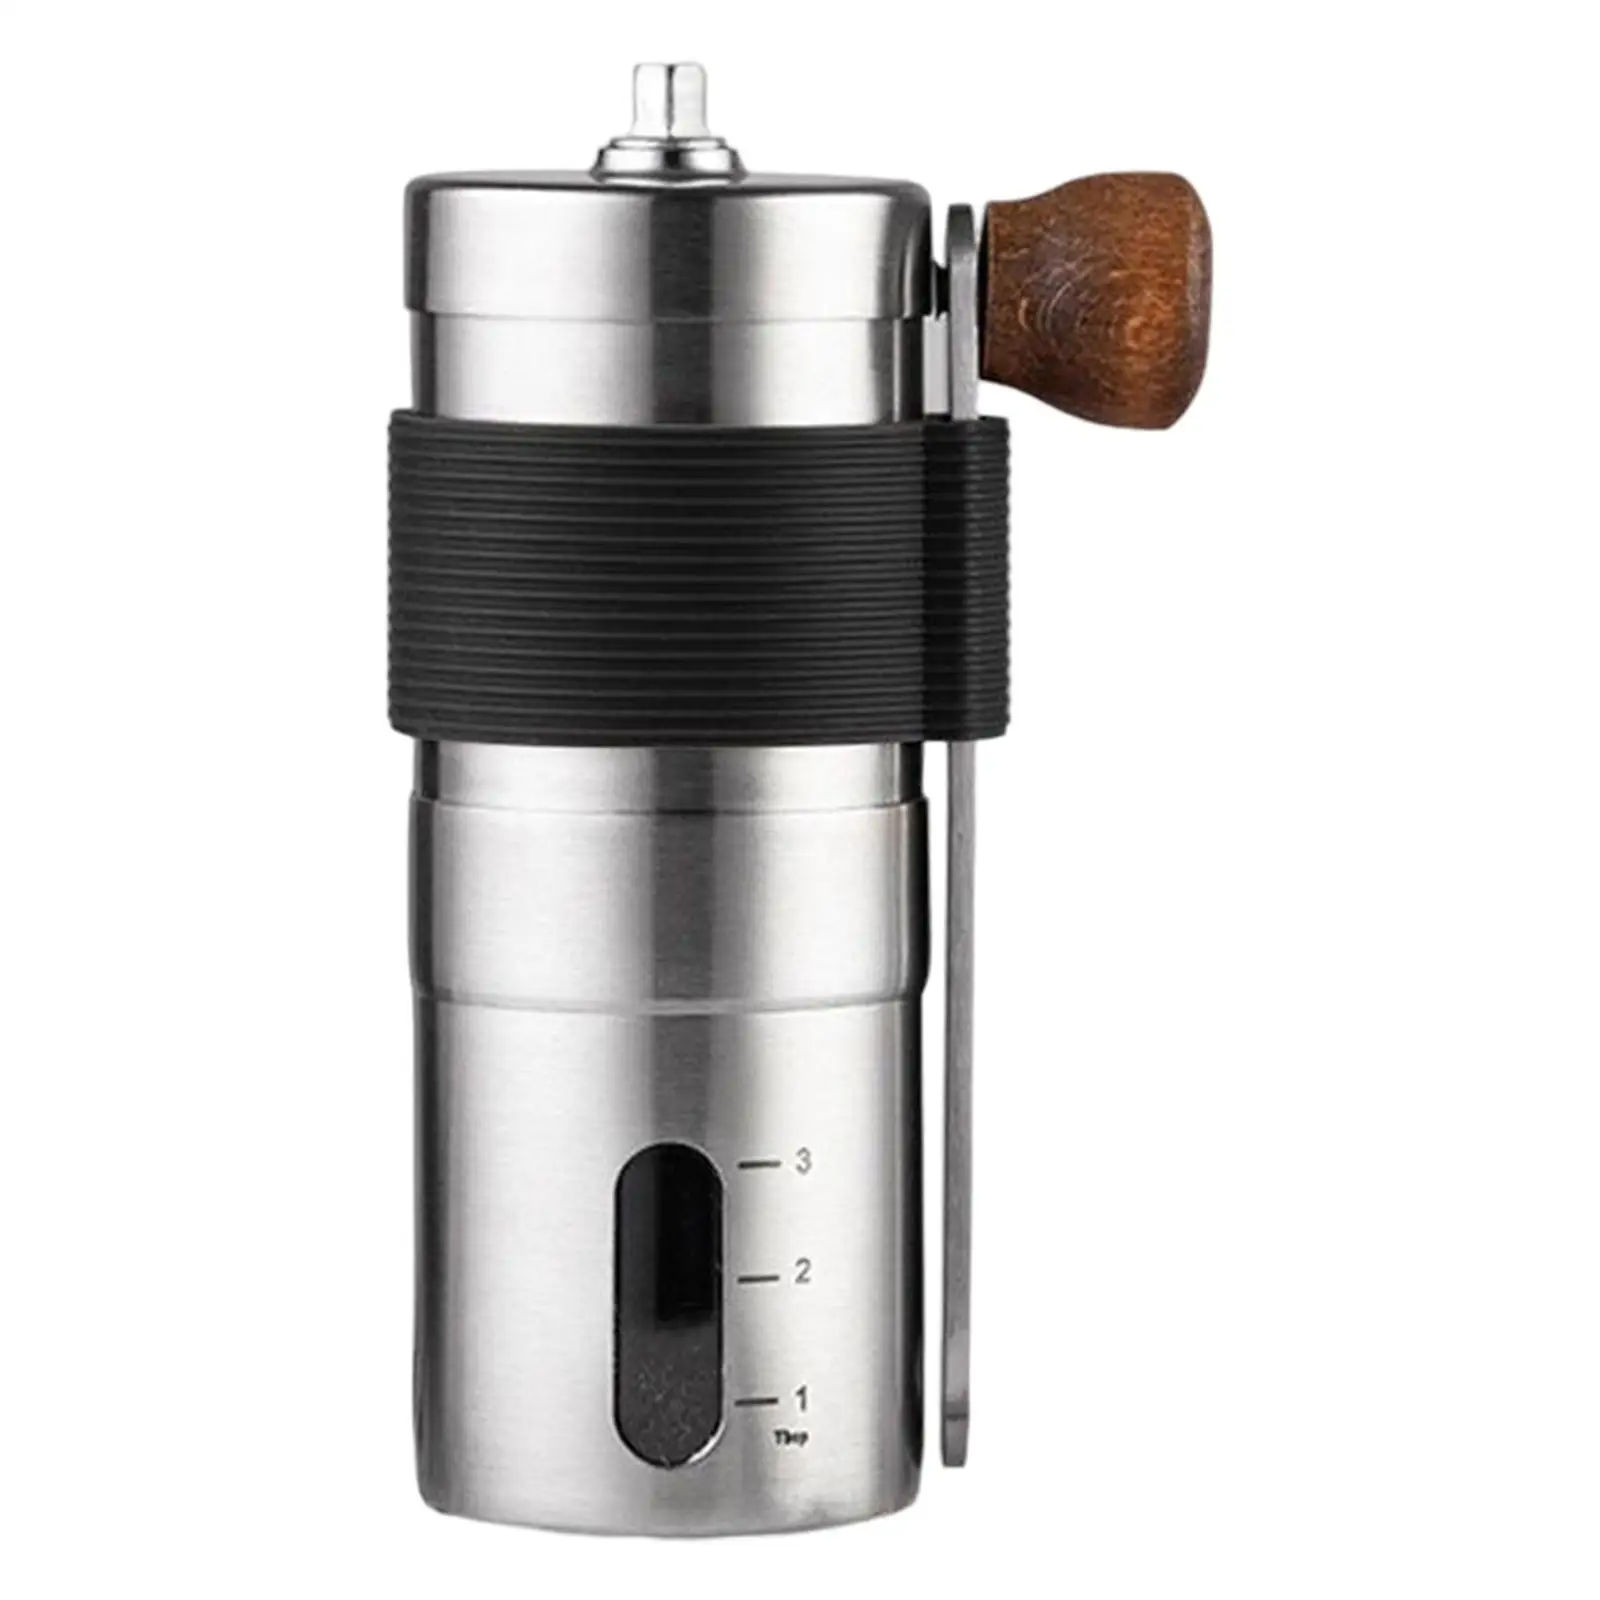 Stainless Steel Ceramic Manual Burr Coffee Grinder Spice/Nuts Grinding Mill for Office Picnic Hiking